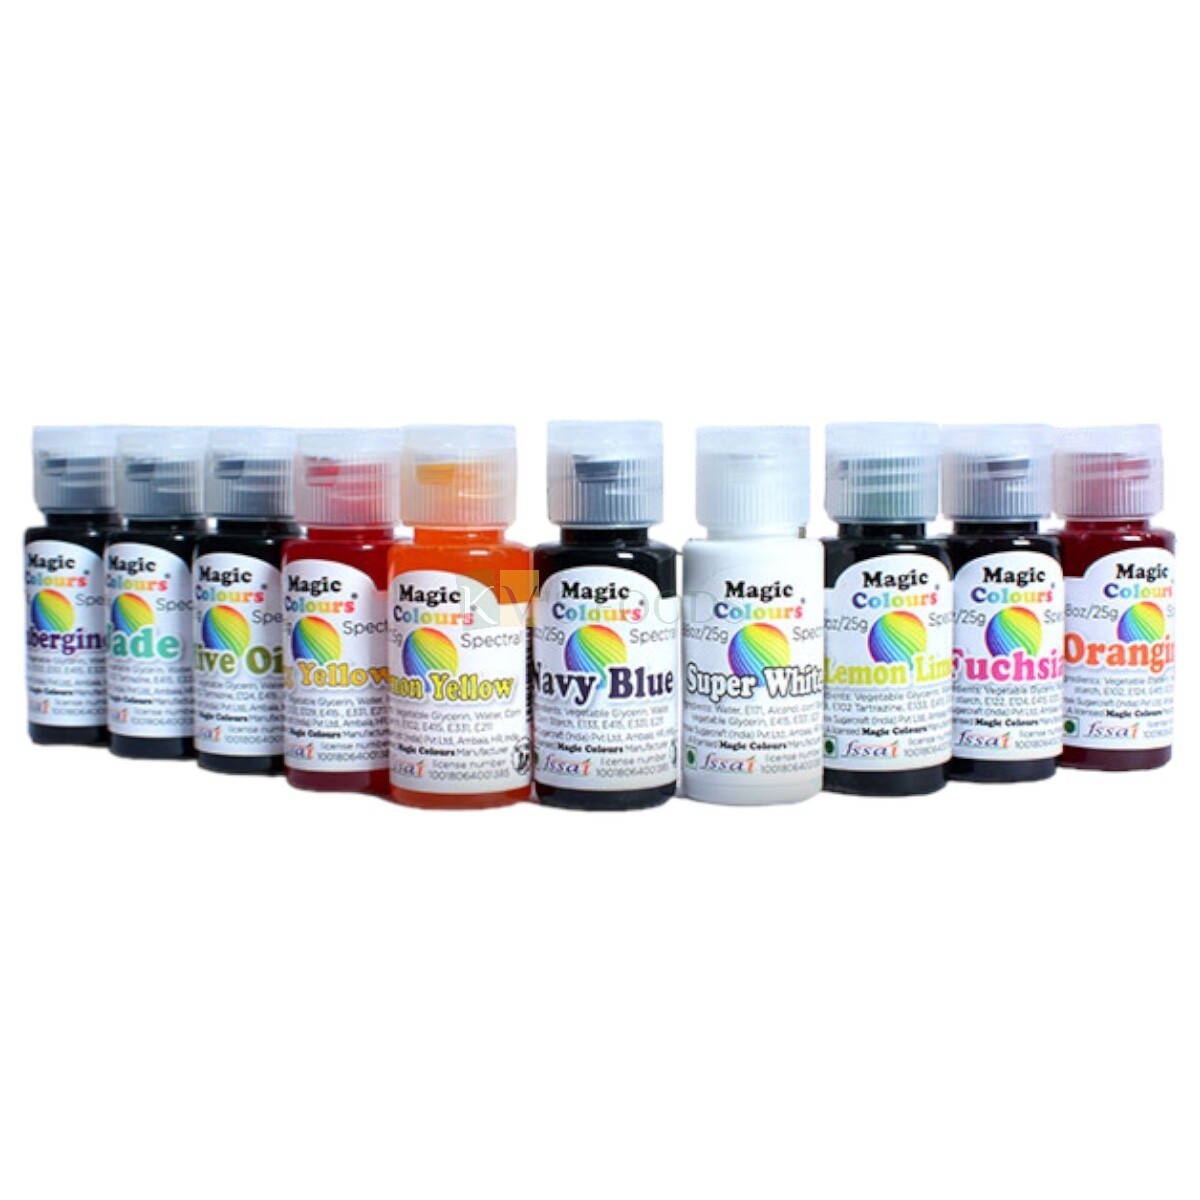 Magic Colours Gel Food Color (25g) Spectral Mini | Food Colour for Cake Decor | Food Colours | Baking | Decorating | Icing | Cooking | Slime Making